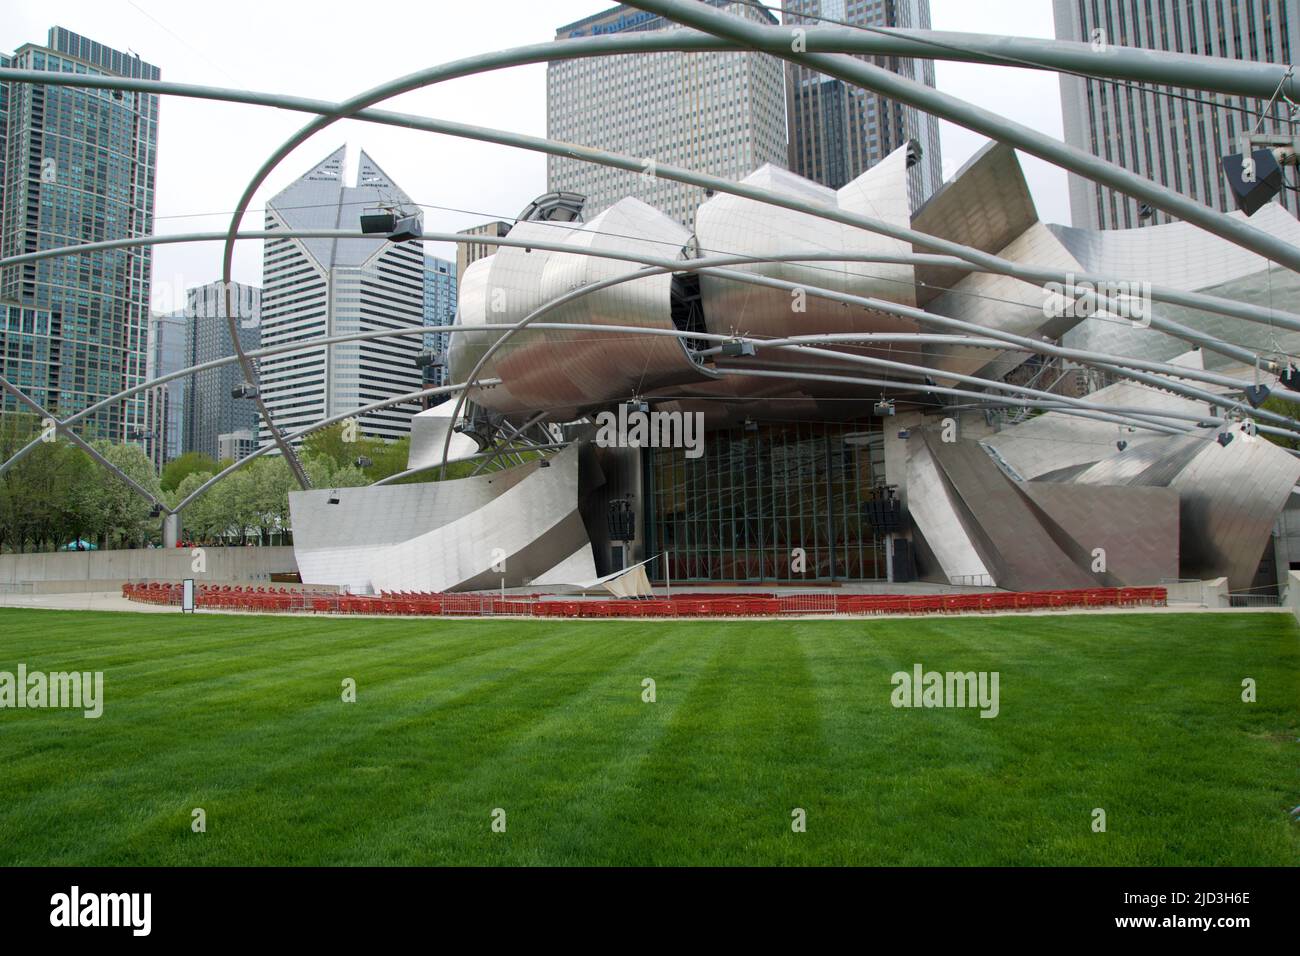 CHICAGO, ILLINOIS, UNITED STATES - MAY 12, 2018: Jay Pritzker Pavilion is the concert shell designed by architect Frank Gehry in Millennium Park on a Stock Photo